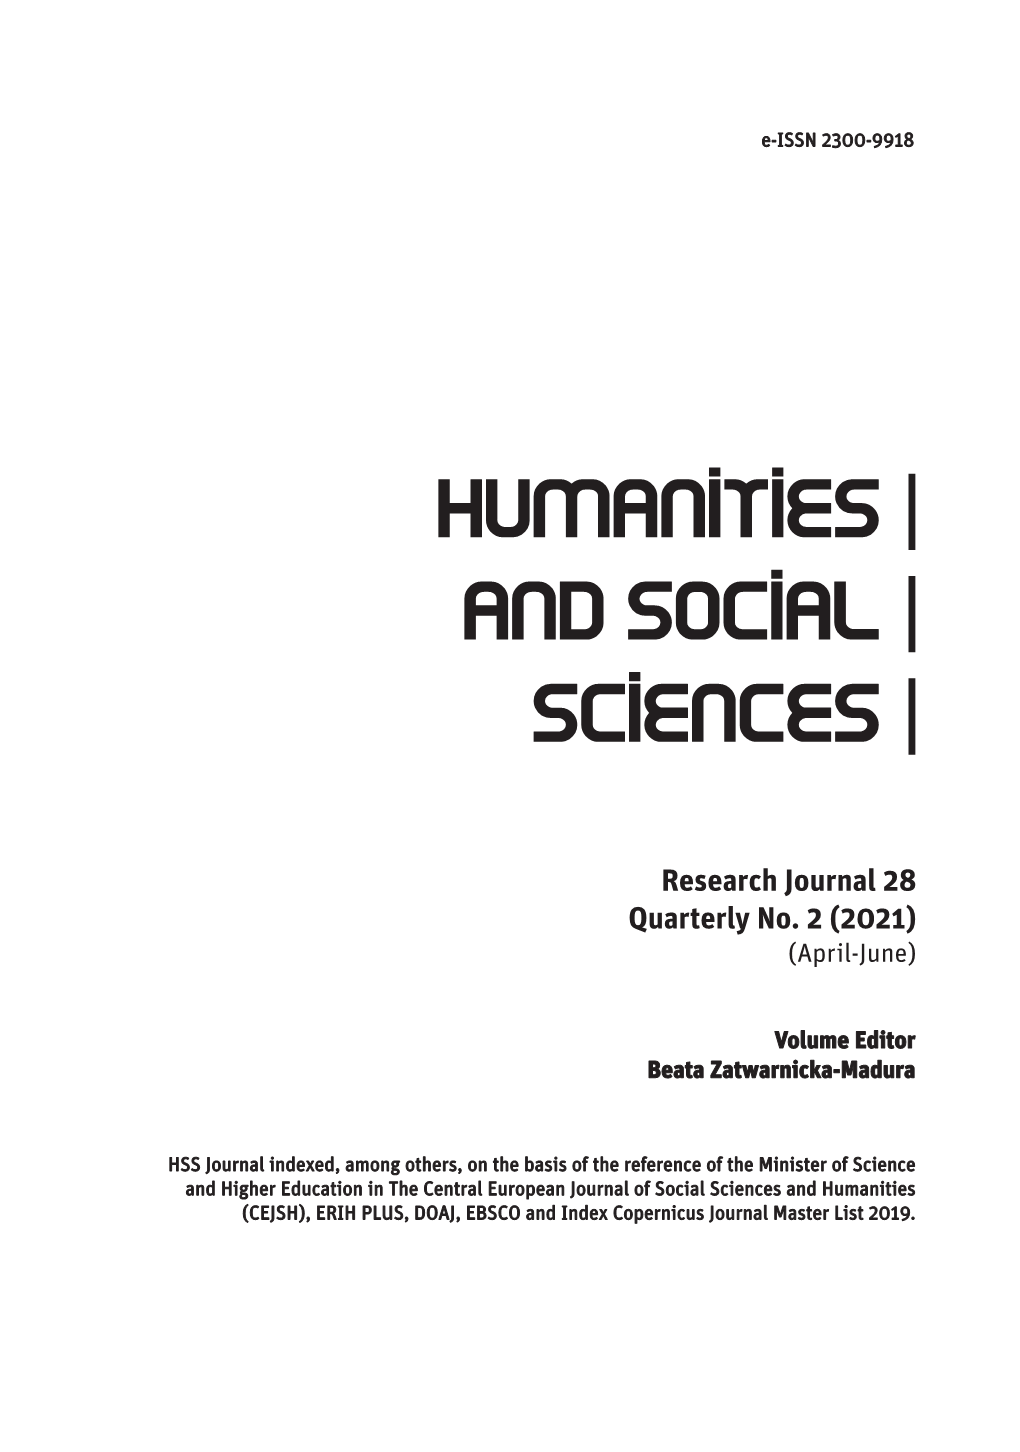 Research Journal 28 Quarterly No. 2 (2021) (April-June)